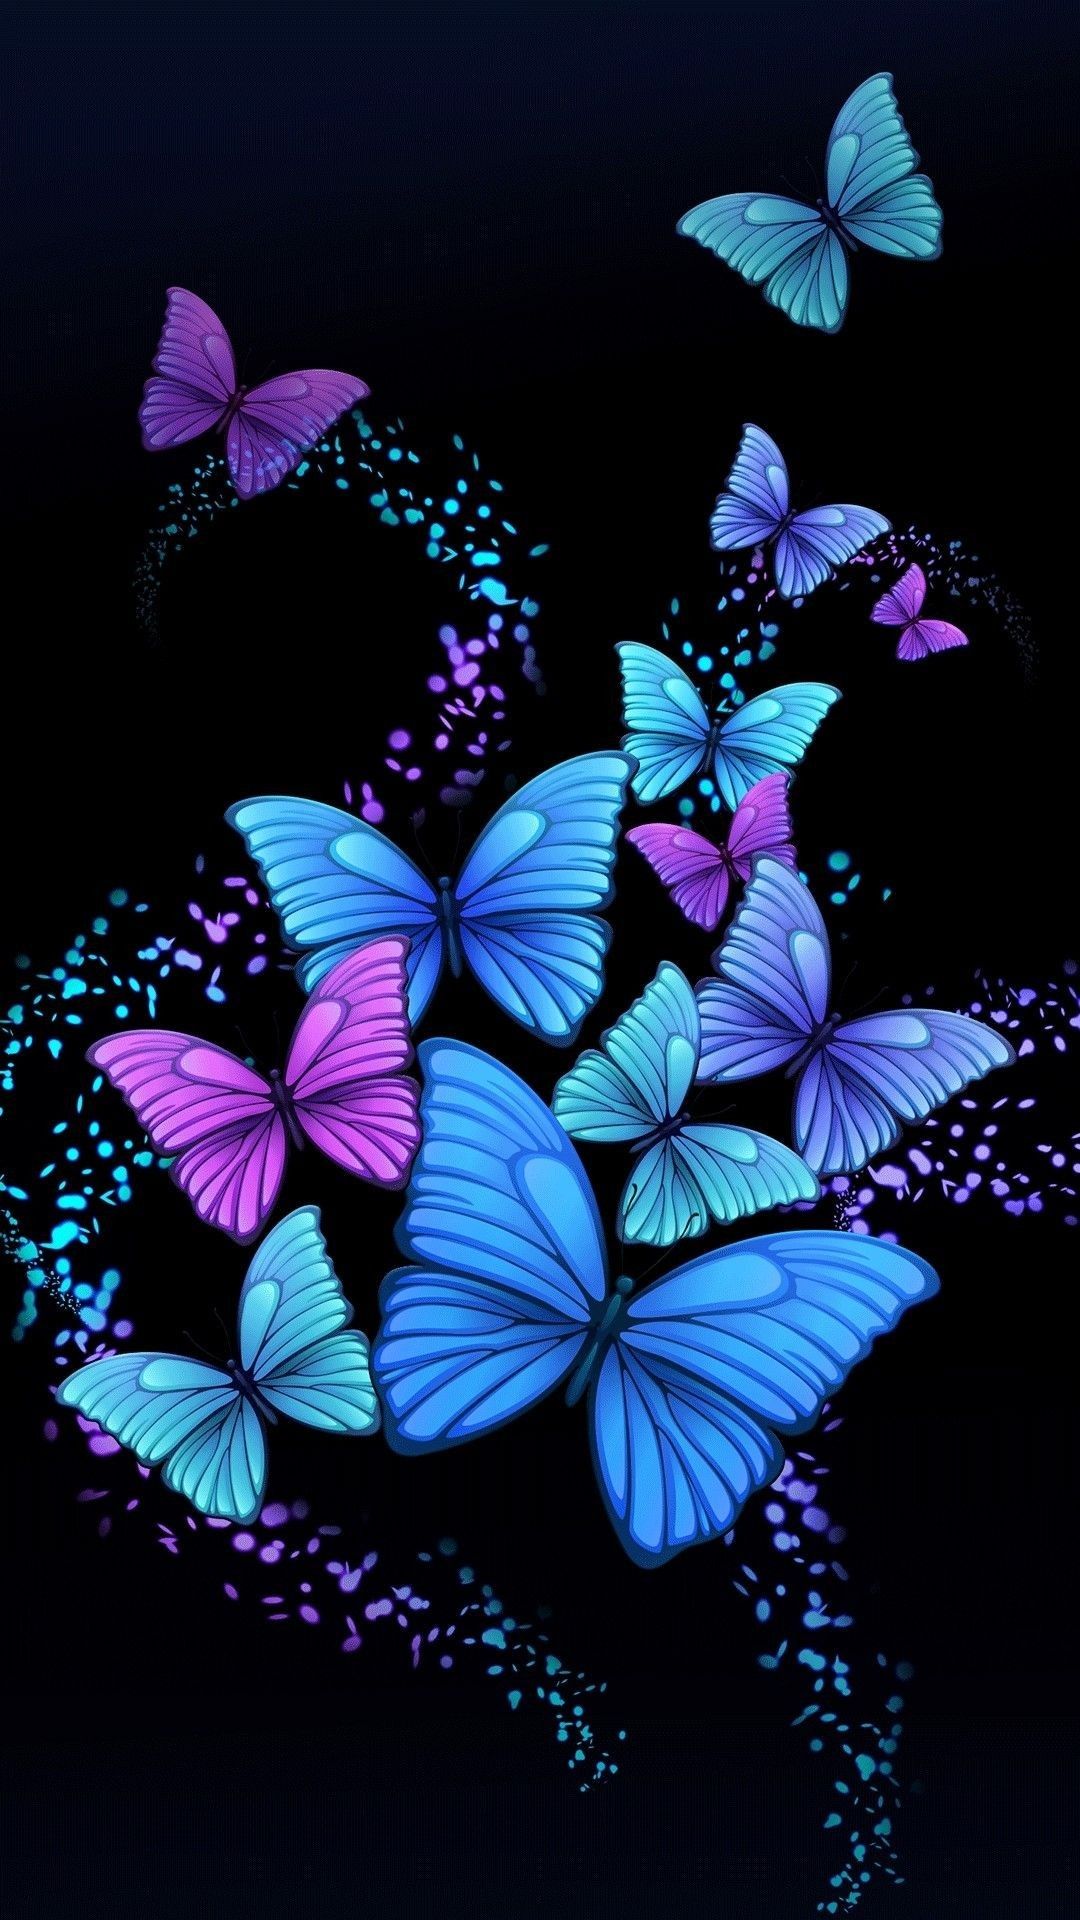 butterfly with flowers wallpapers,butterfly,blue,purple,violet,insect